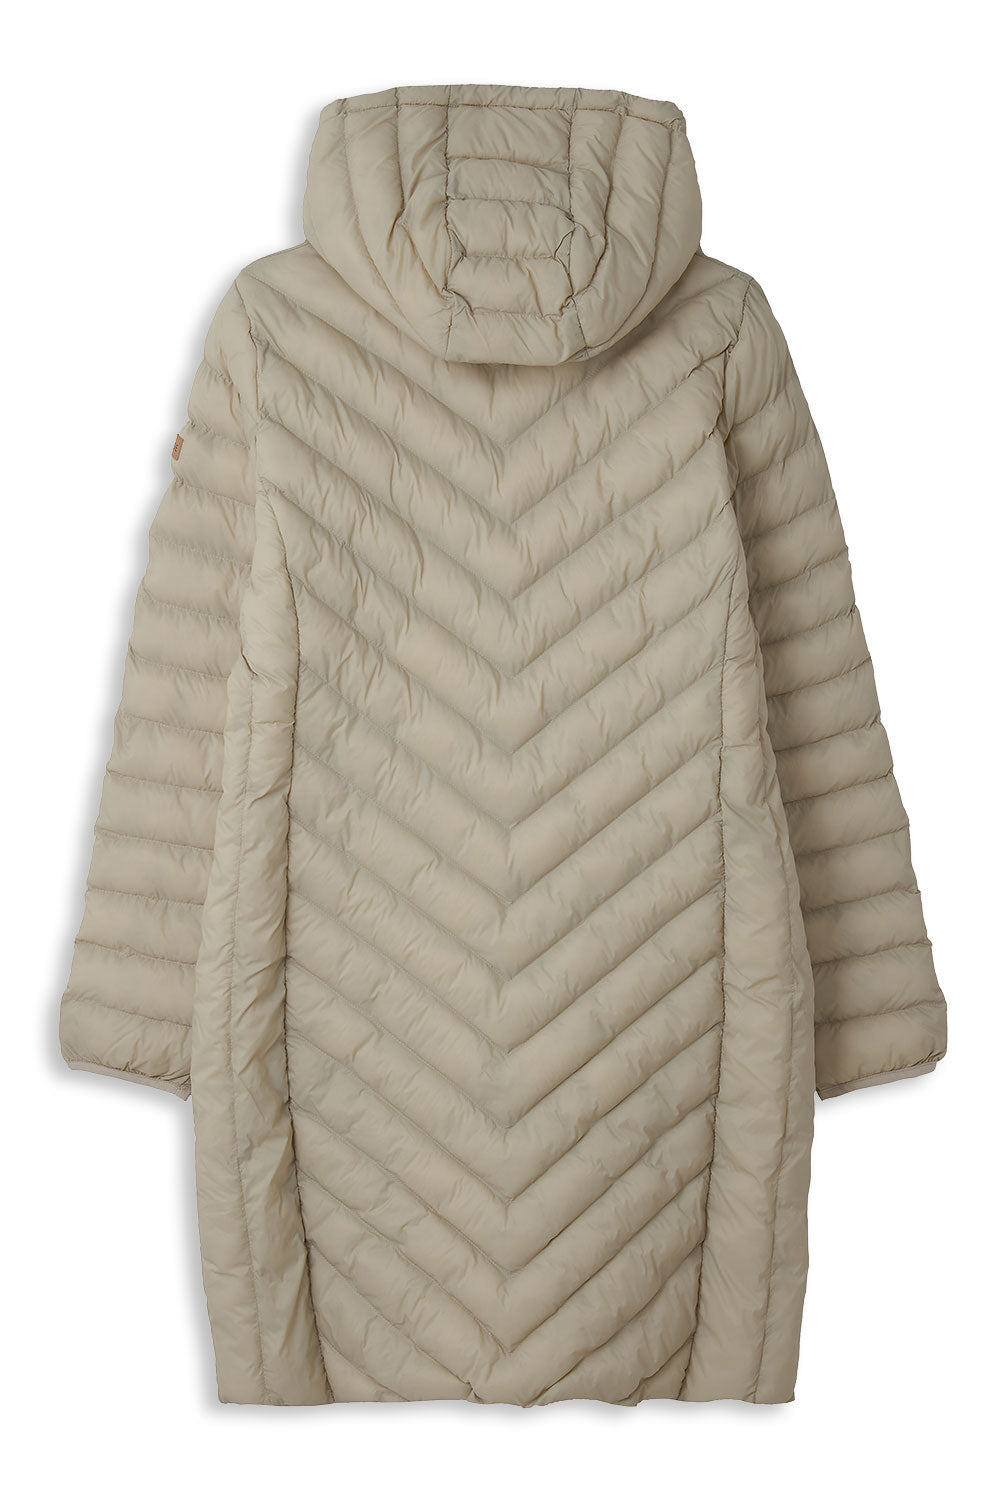 Almond Laurel Ladies Quilted Synthetic Down Duvet Coat by Lighthouse 